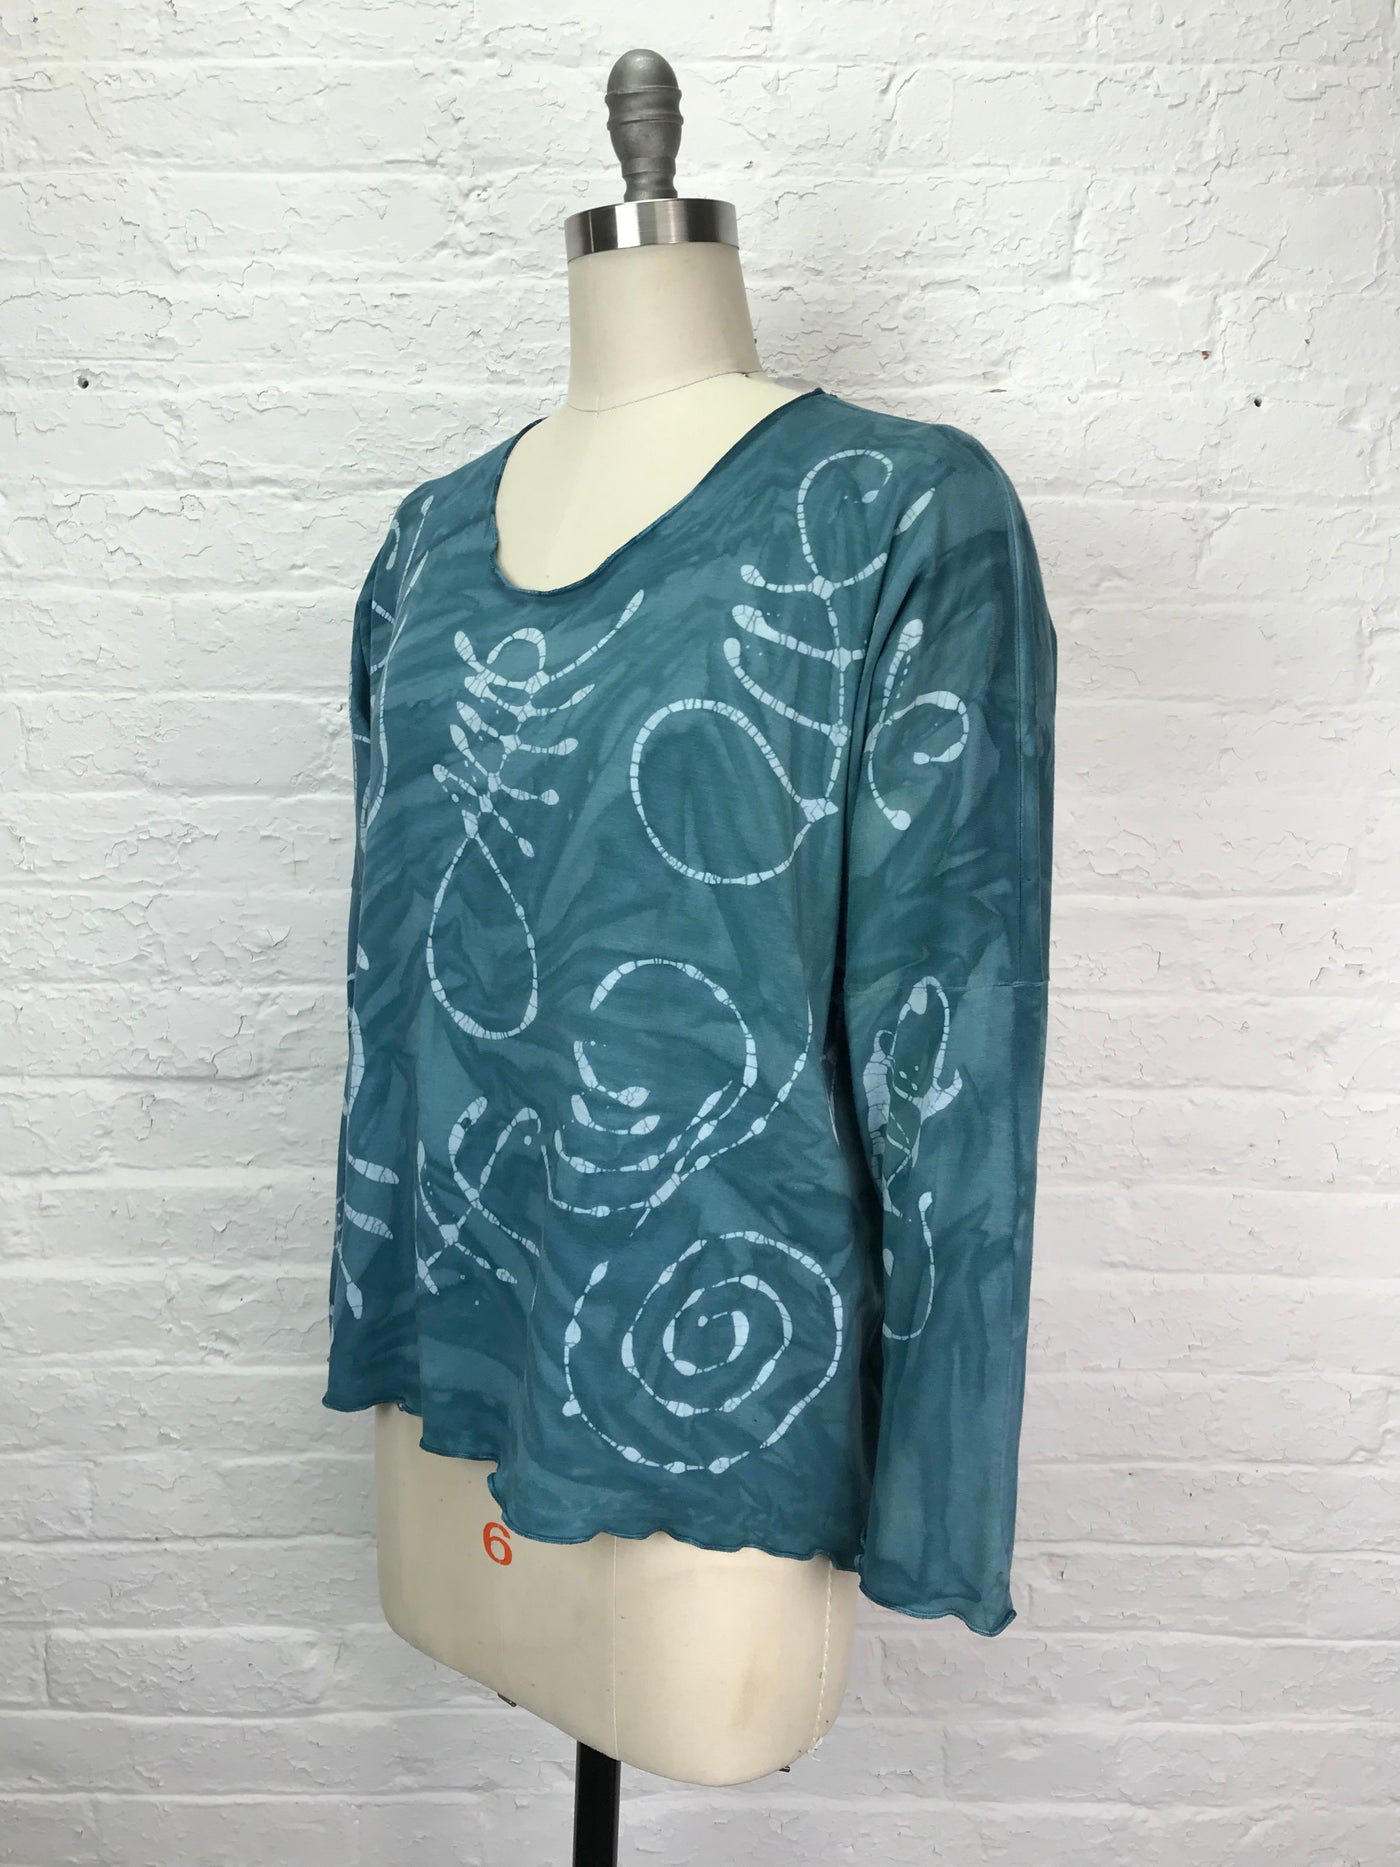 Nyla Long Sleeve Shirt in Teal Archeology - One size